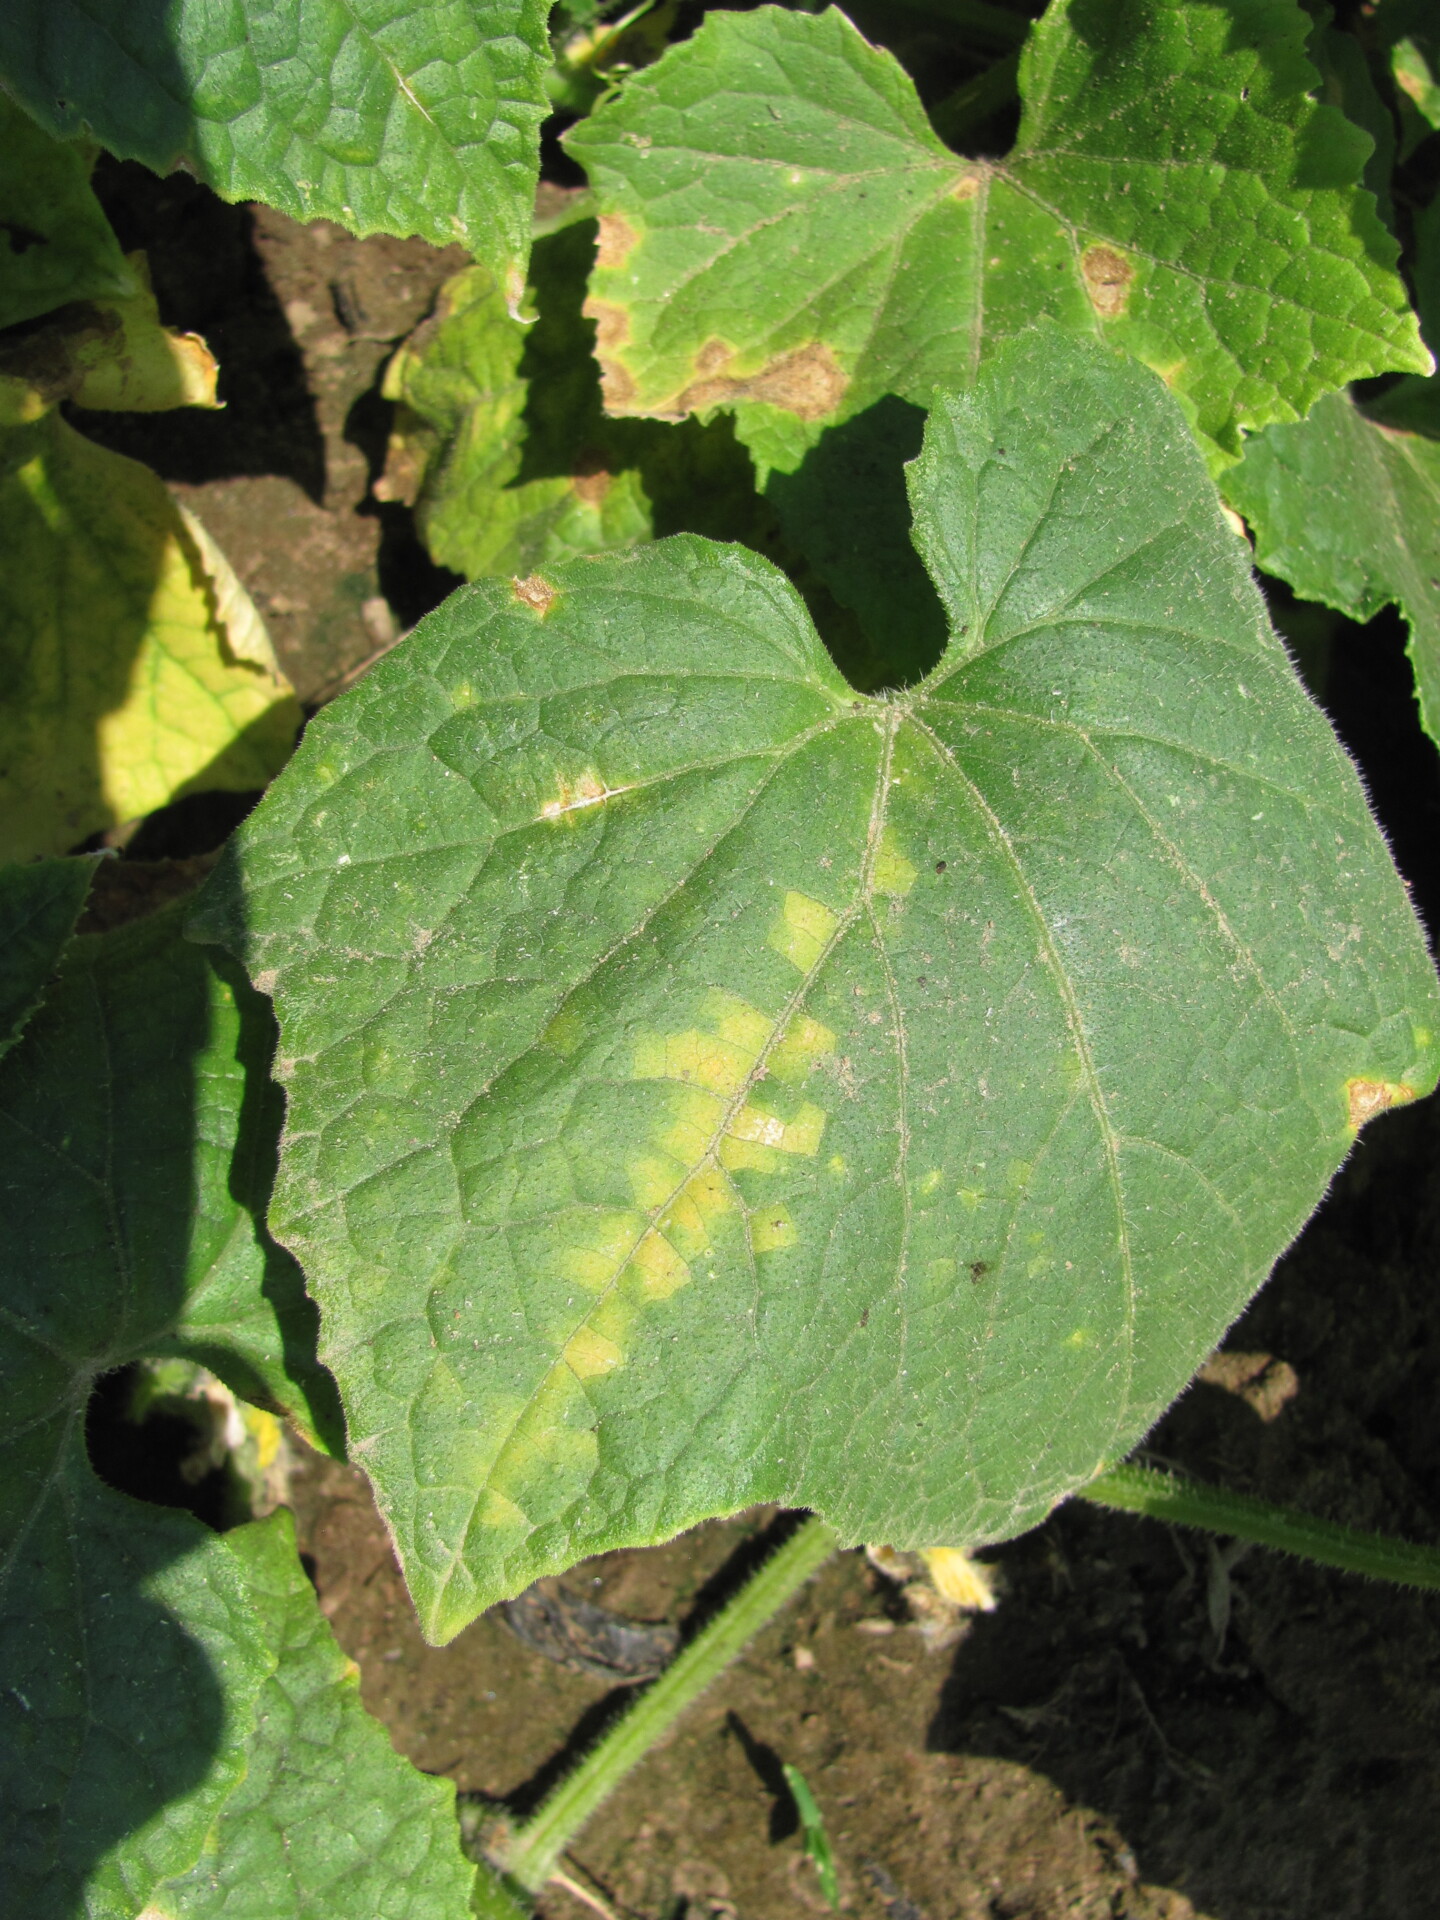 Downy mildew of cucumber. Note angular chlorotic lesions.